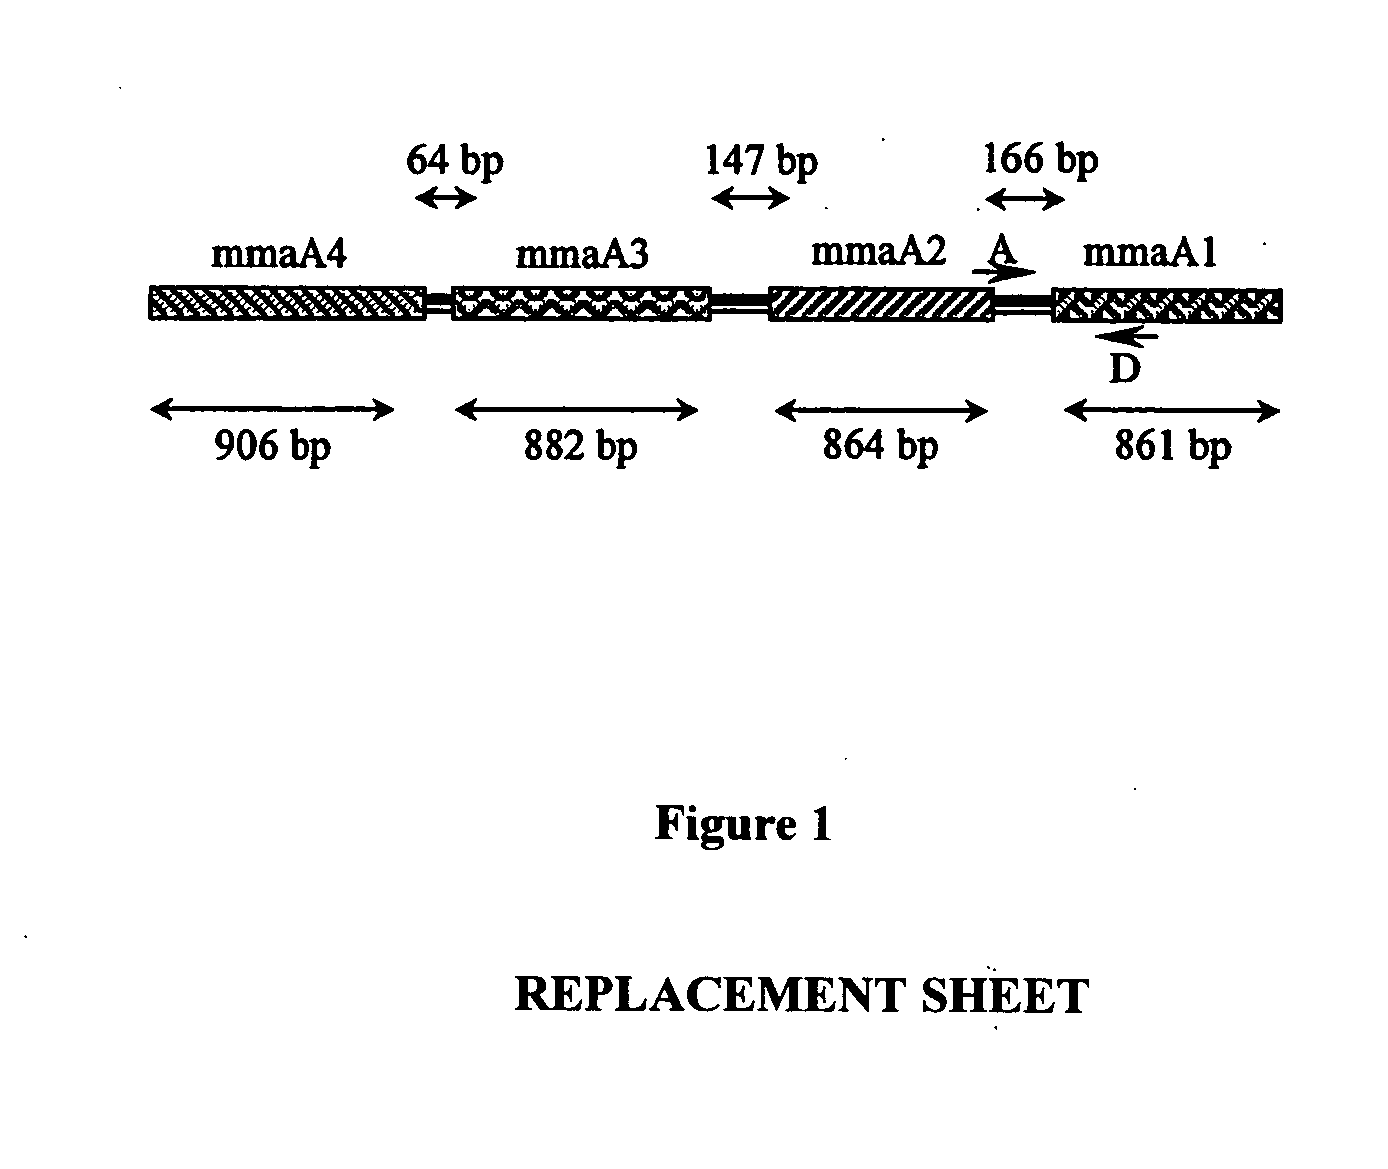 Method for detecting pathogenic mycobacteria in clinical specimens